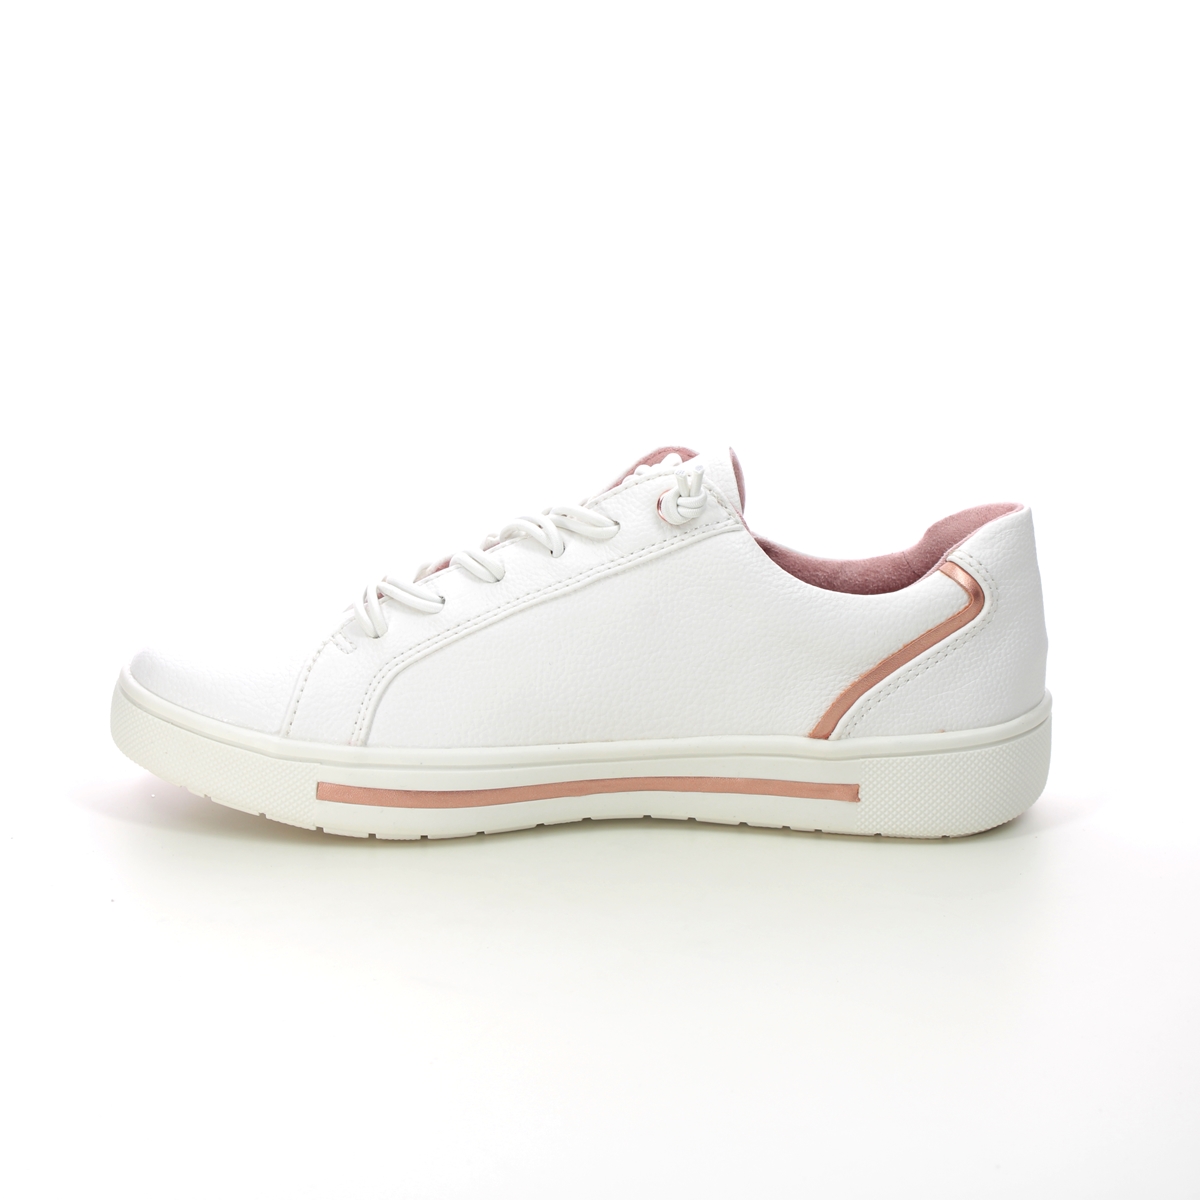 Jana Altozip Wide White Rose gold Womens trainers 23660-20-152